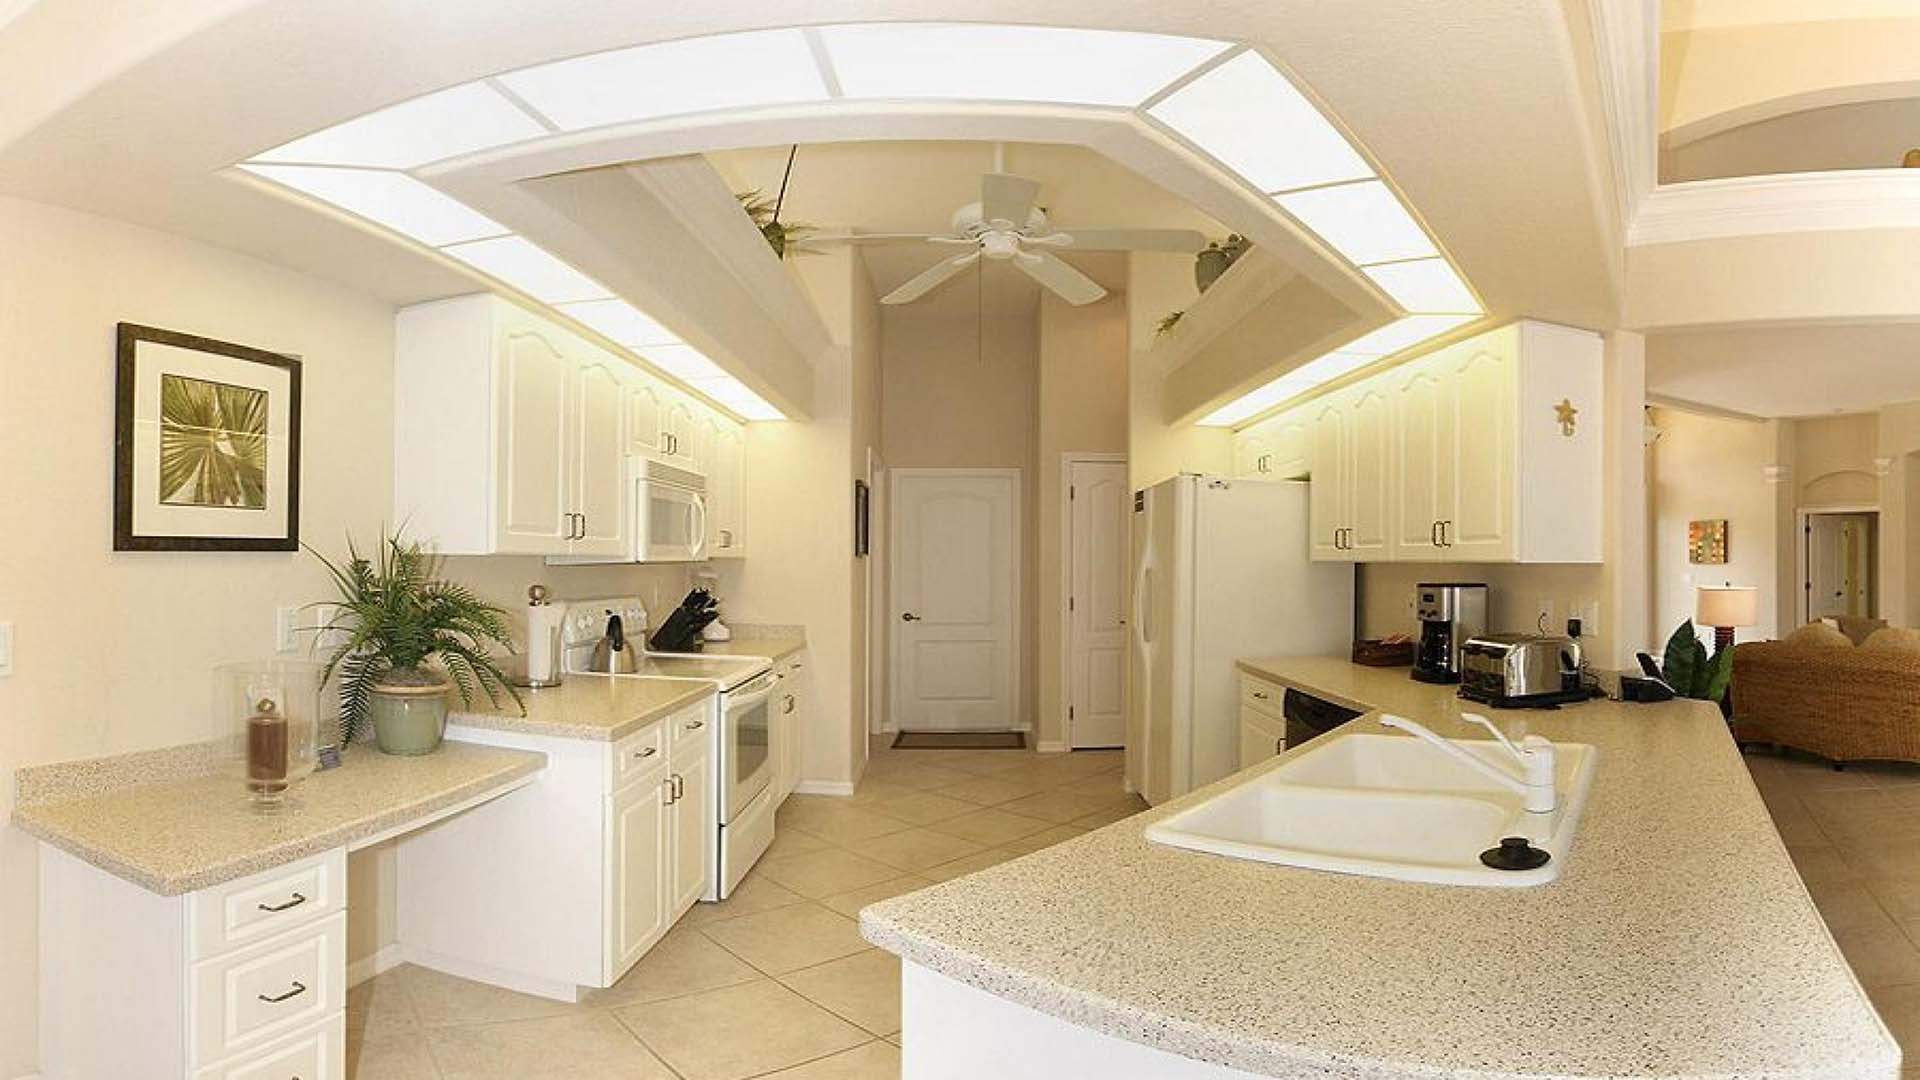 The elegant white kitchen is fully equipped